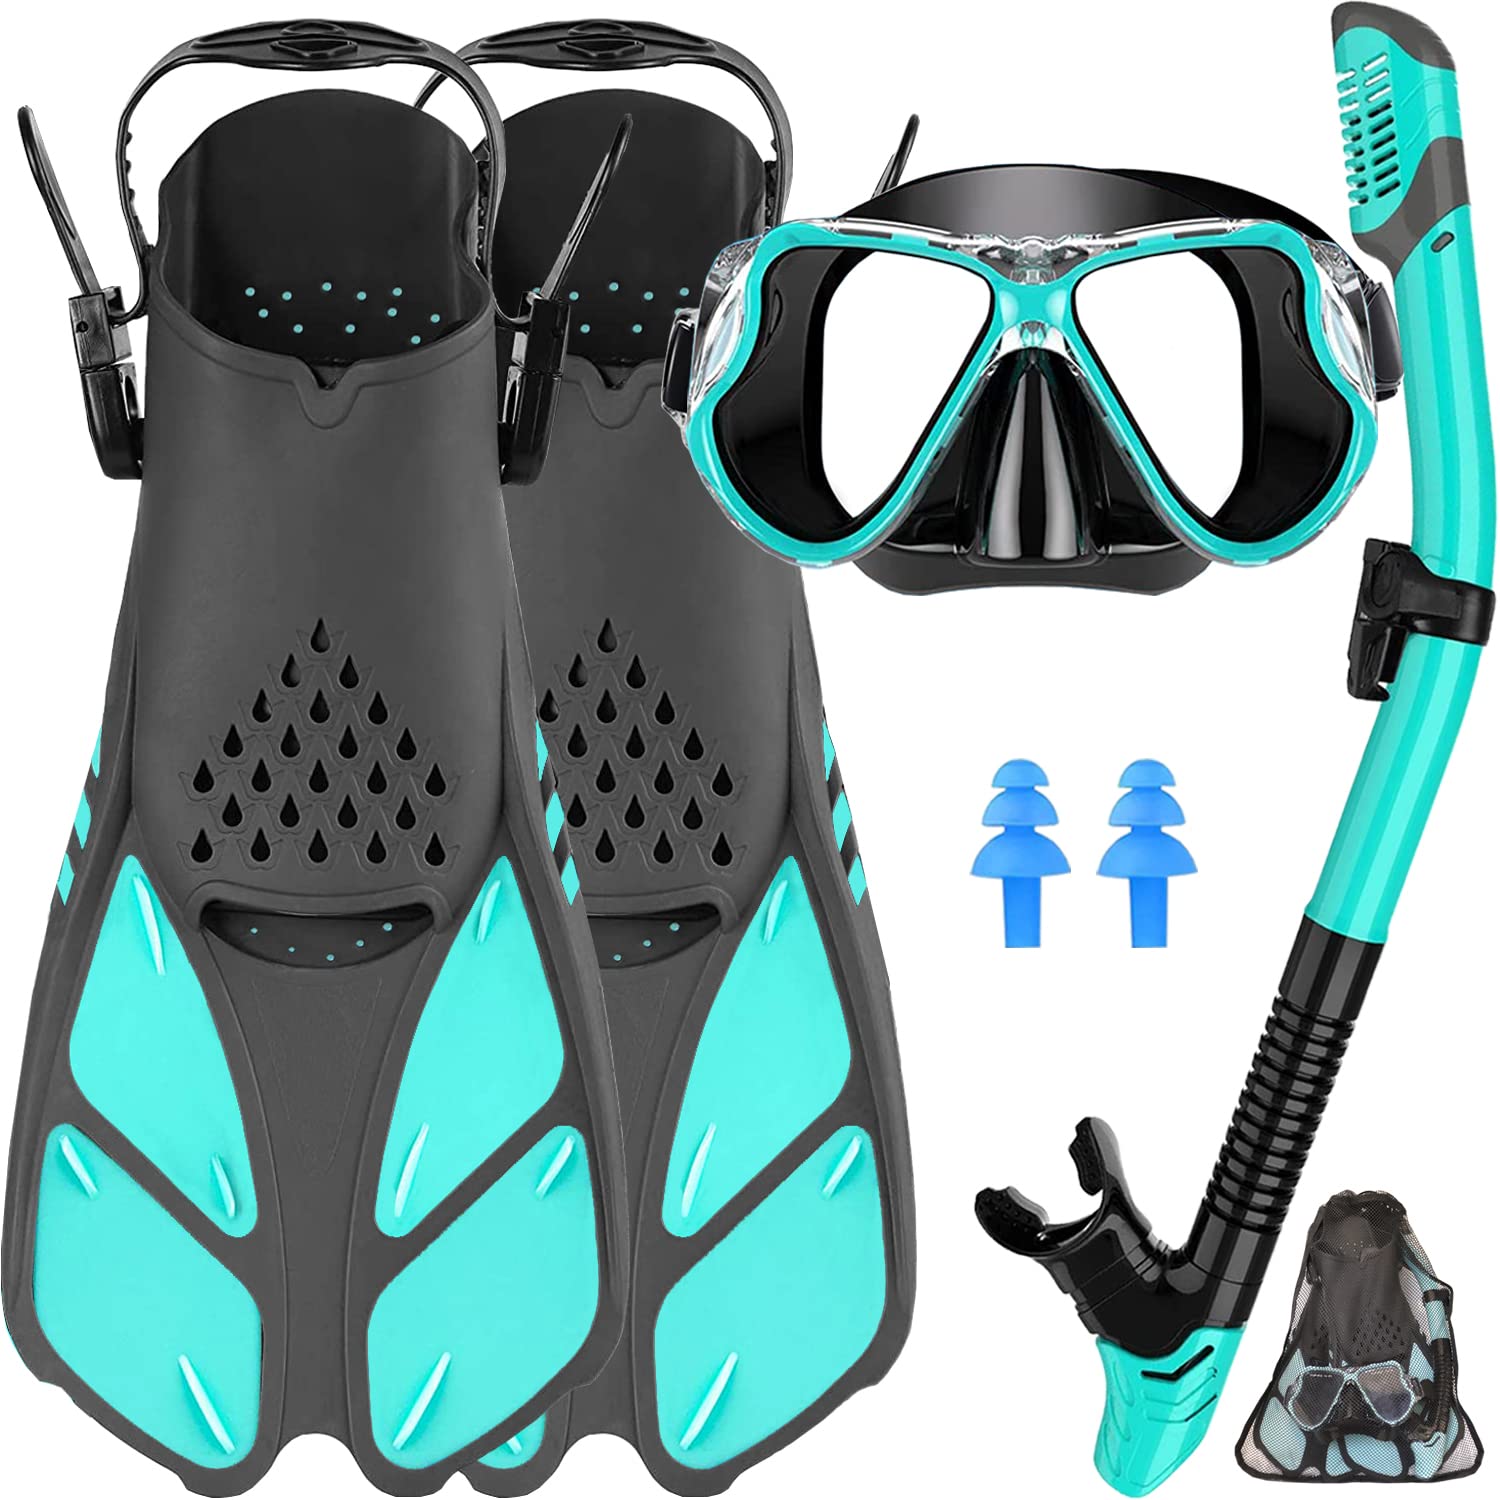 Createy Mask Fin Snorkel Set with Adult Snorkeling Gear, Panoramic View Diving  Mask, Trek Fin, Dry Top Snorkel +Travel Bags, Snorkel for Lap Swimming  Green S/M(Adult US Size 4.5-8.5)